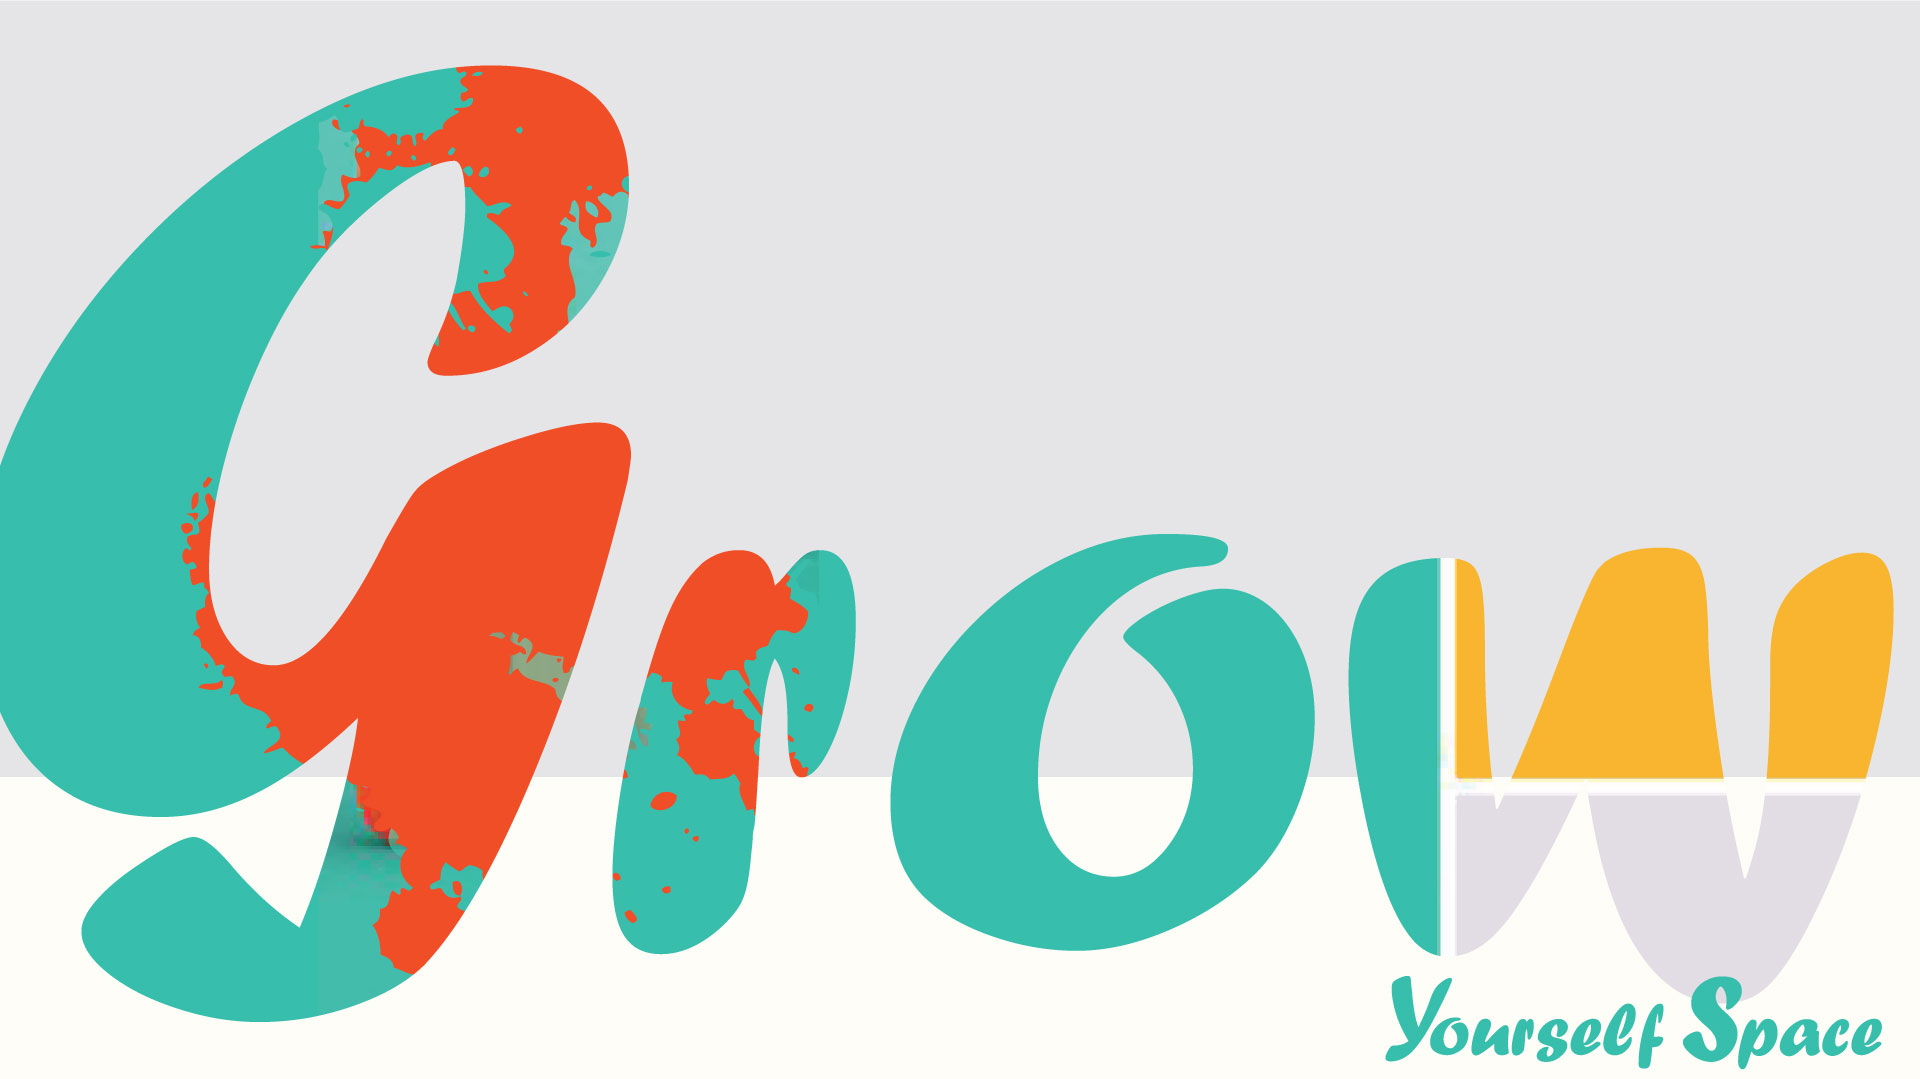 This depiction crafted by PixelUp showcases bold custom lettering depicting the term 'Grow' in lively hues of orange, red, and teal set against a soft purple backdrop. This unique typographic composition act as header visual for one of the primary service pages of the Grow Yourself Space Project, a bespoke website design tailored for evolutionary coaches by PixelUp.